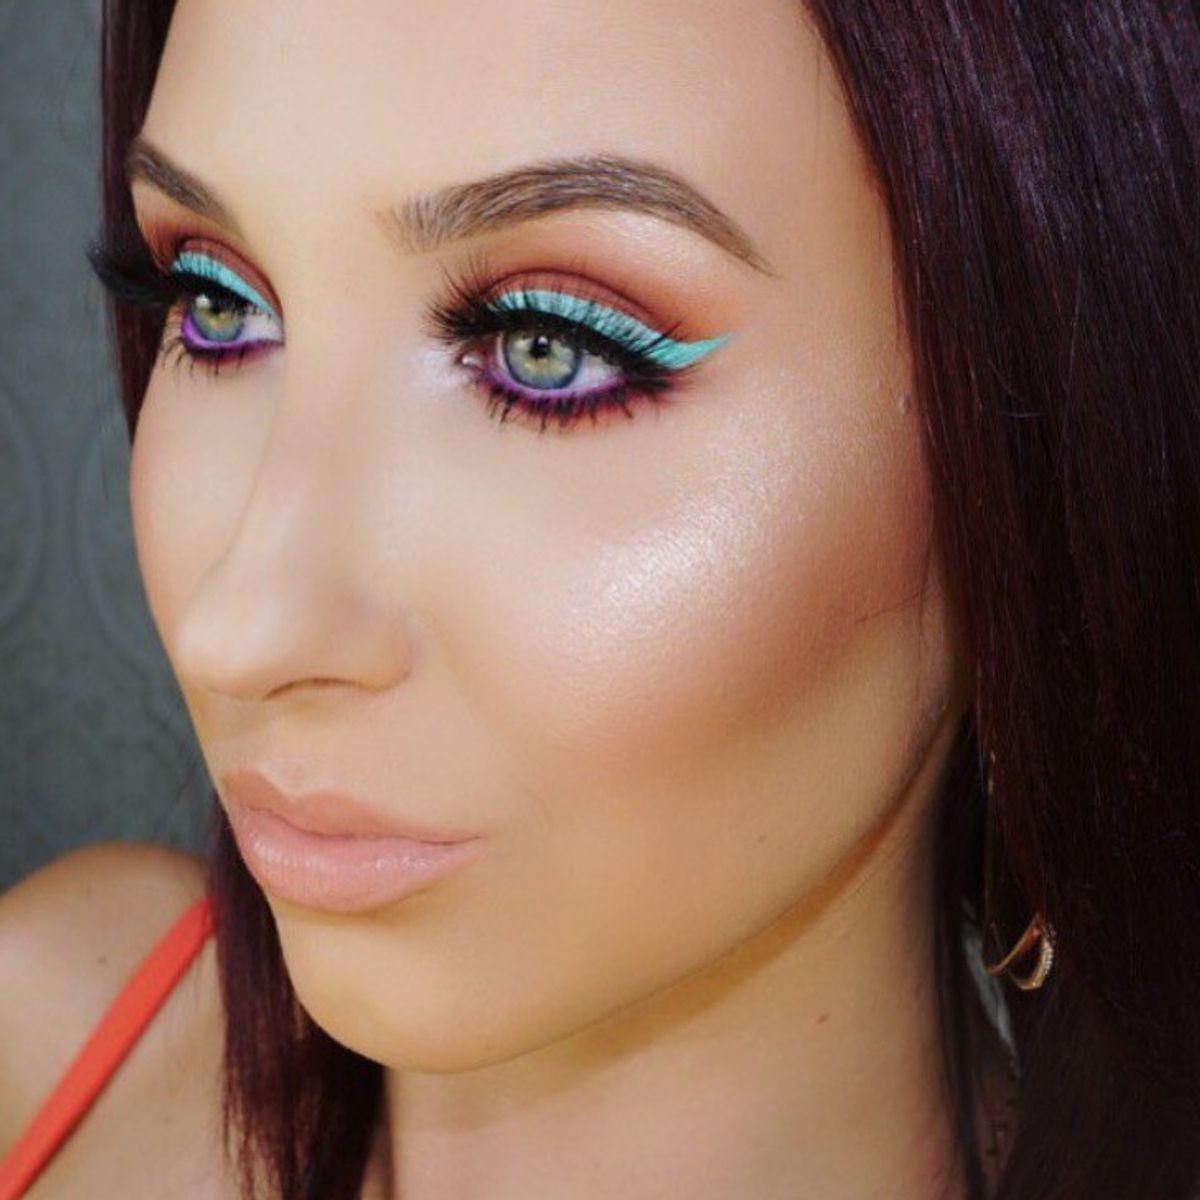 Why I Look Up to a Woman like Jaclyn Hill